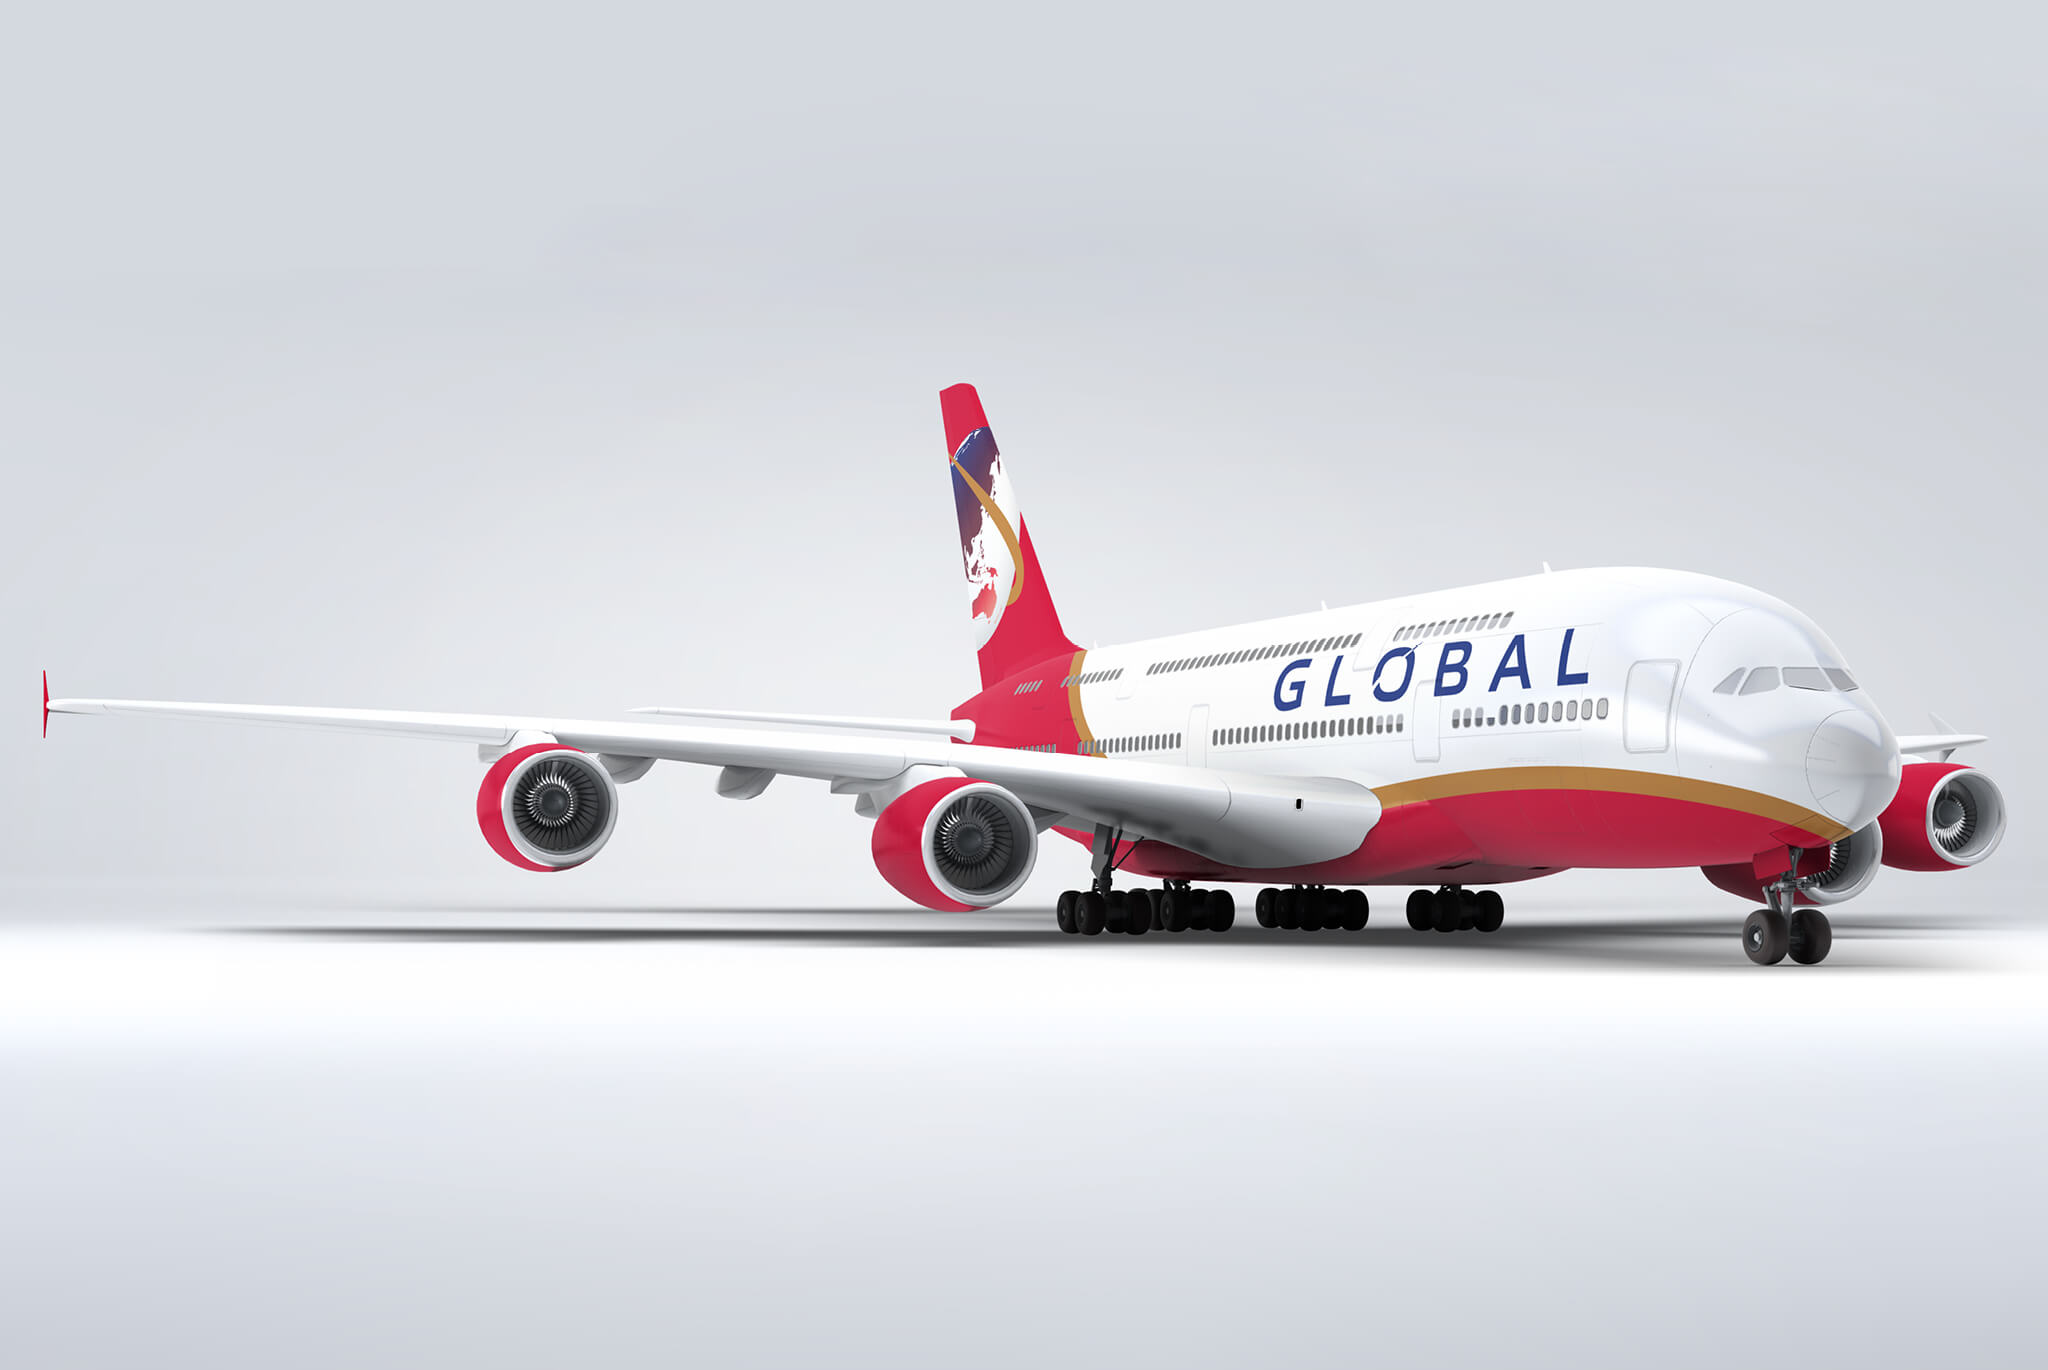 Global Airlines left side livery Europe Asia globe